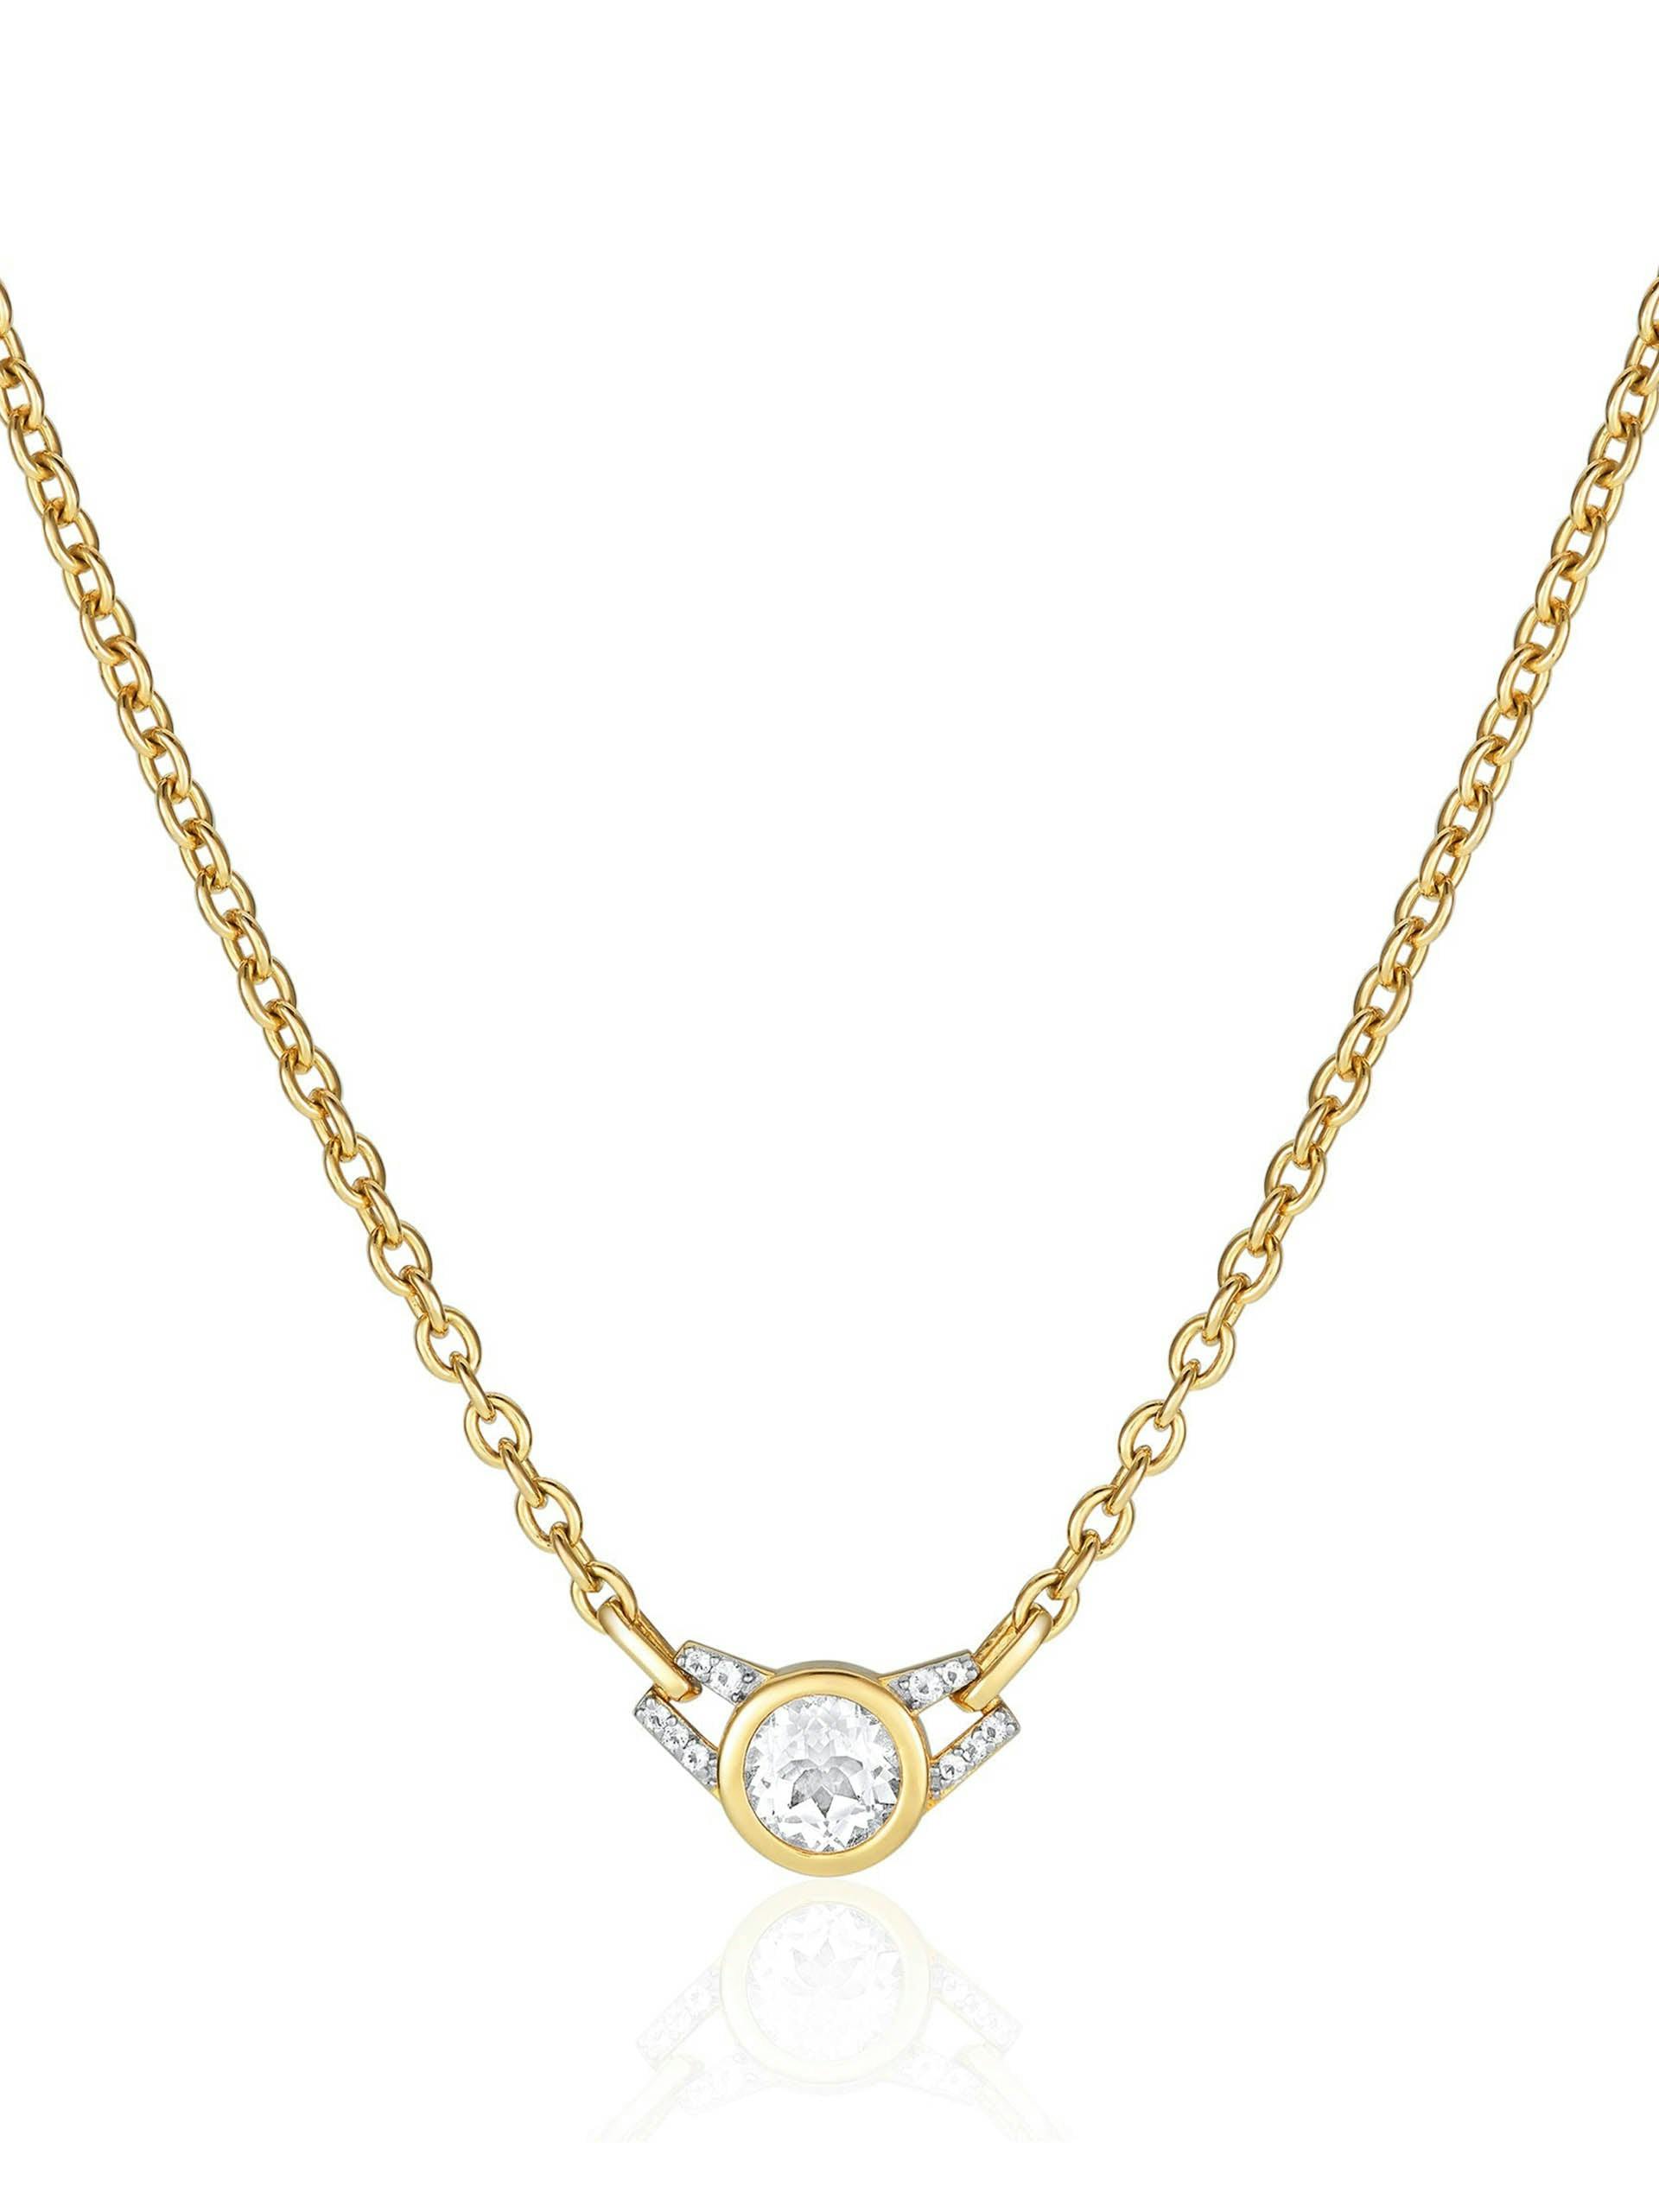 Gold Lucy choker necklace with white topaz